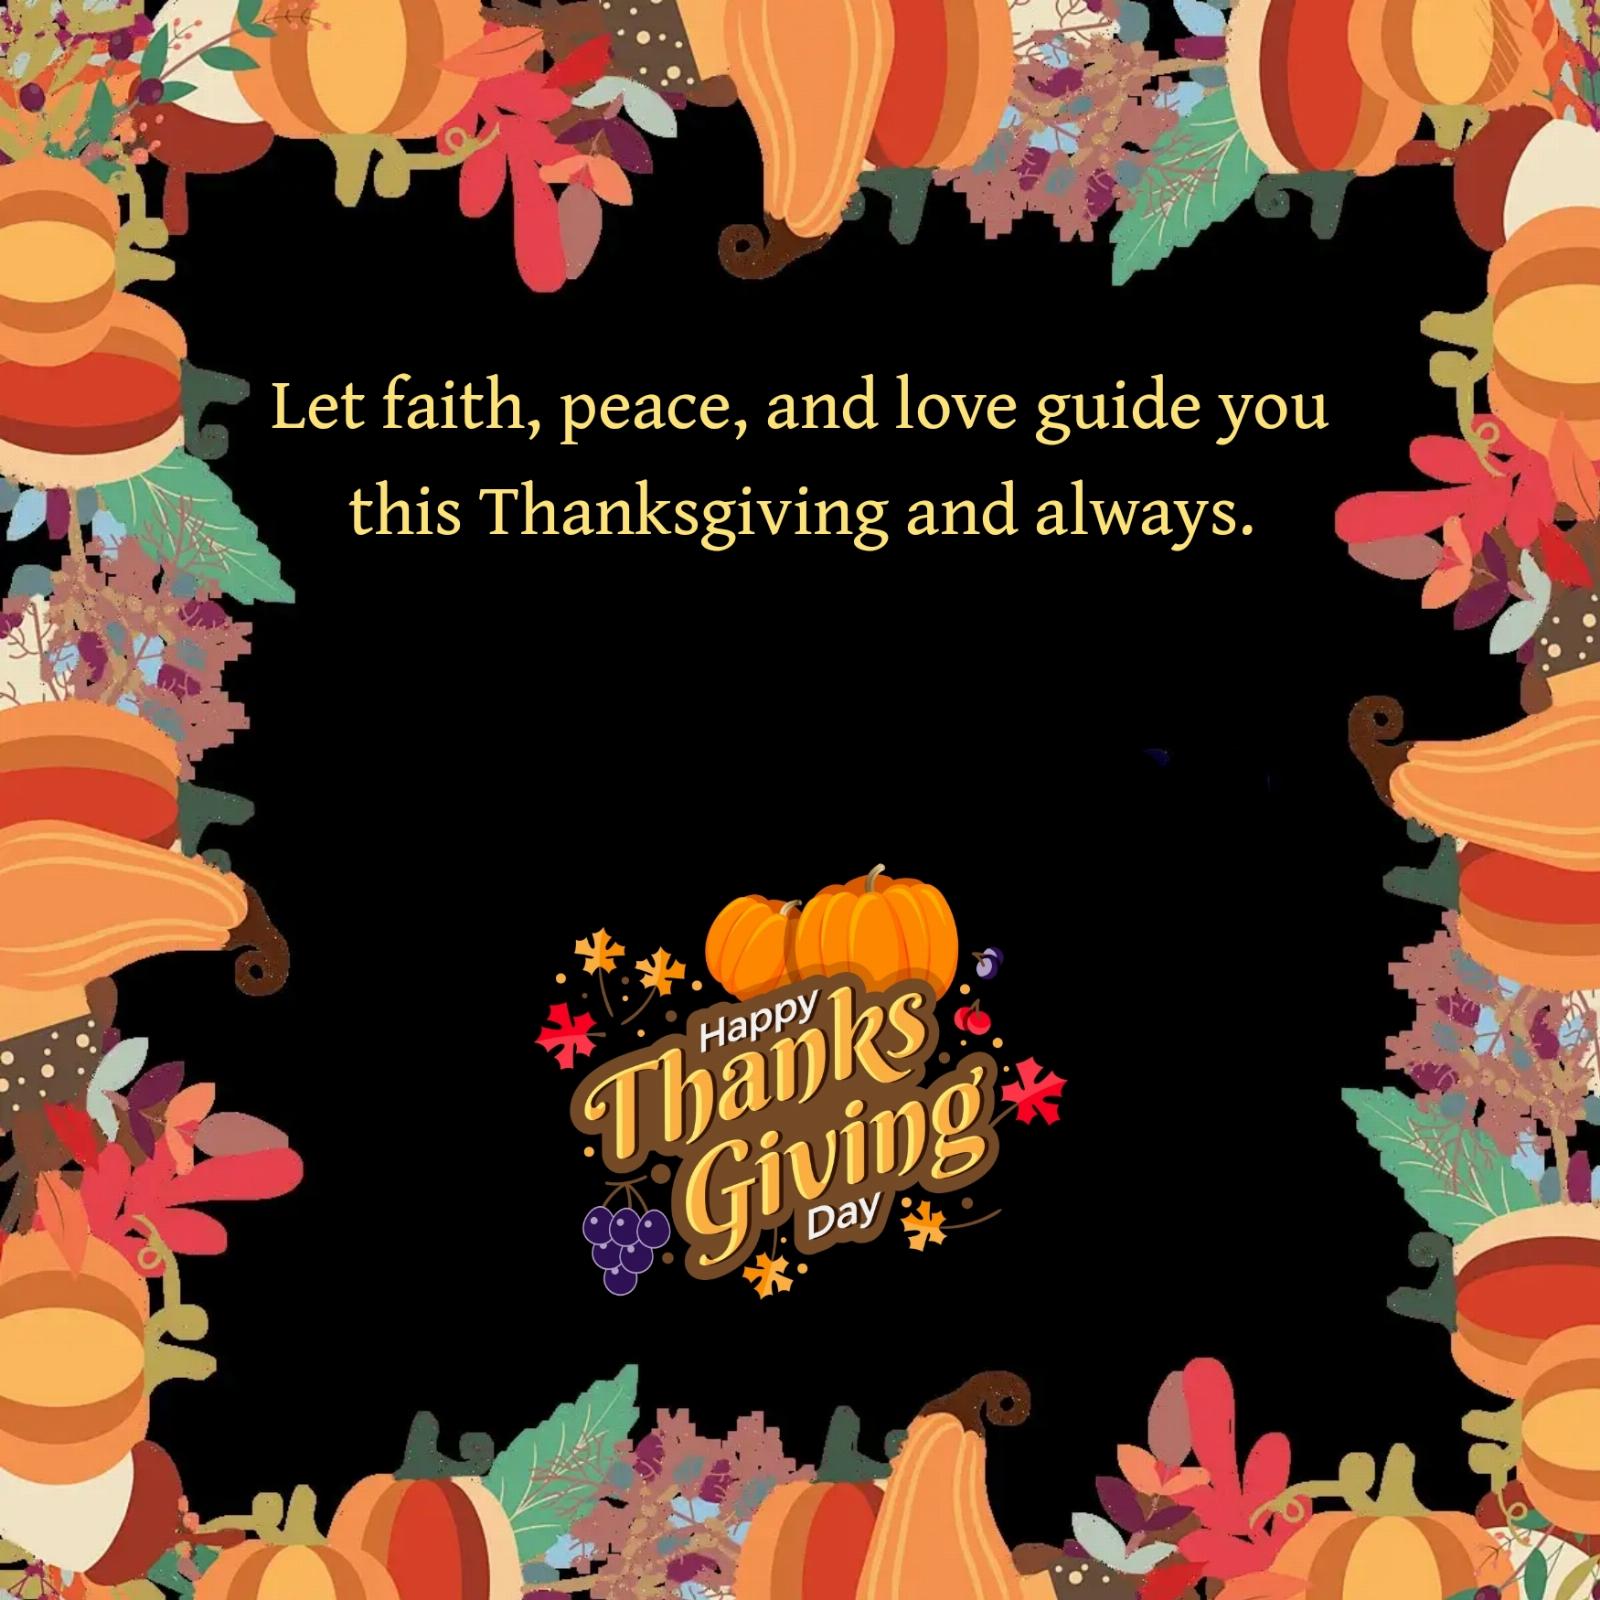 Let faith peace and love guide you this Thanksgiving and always